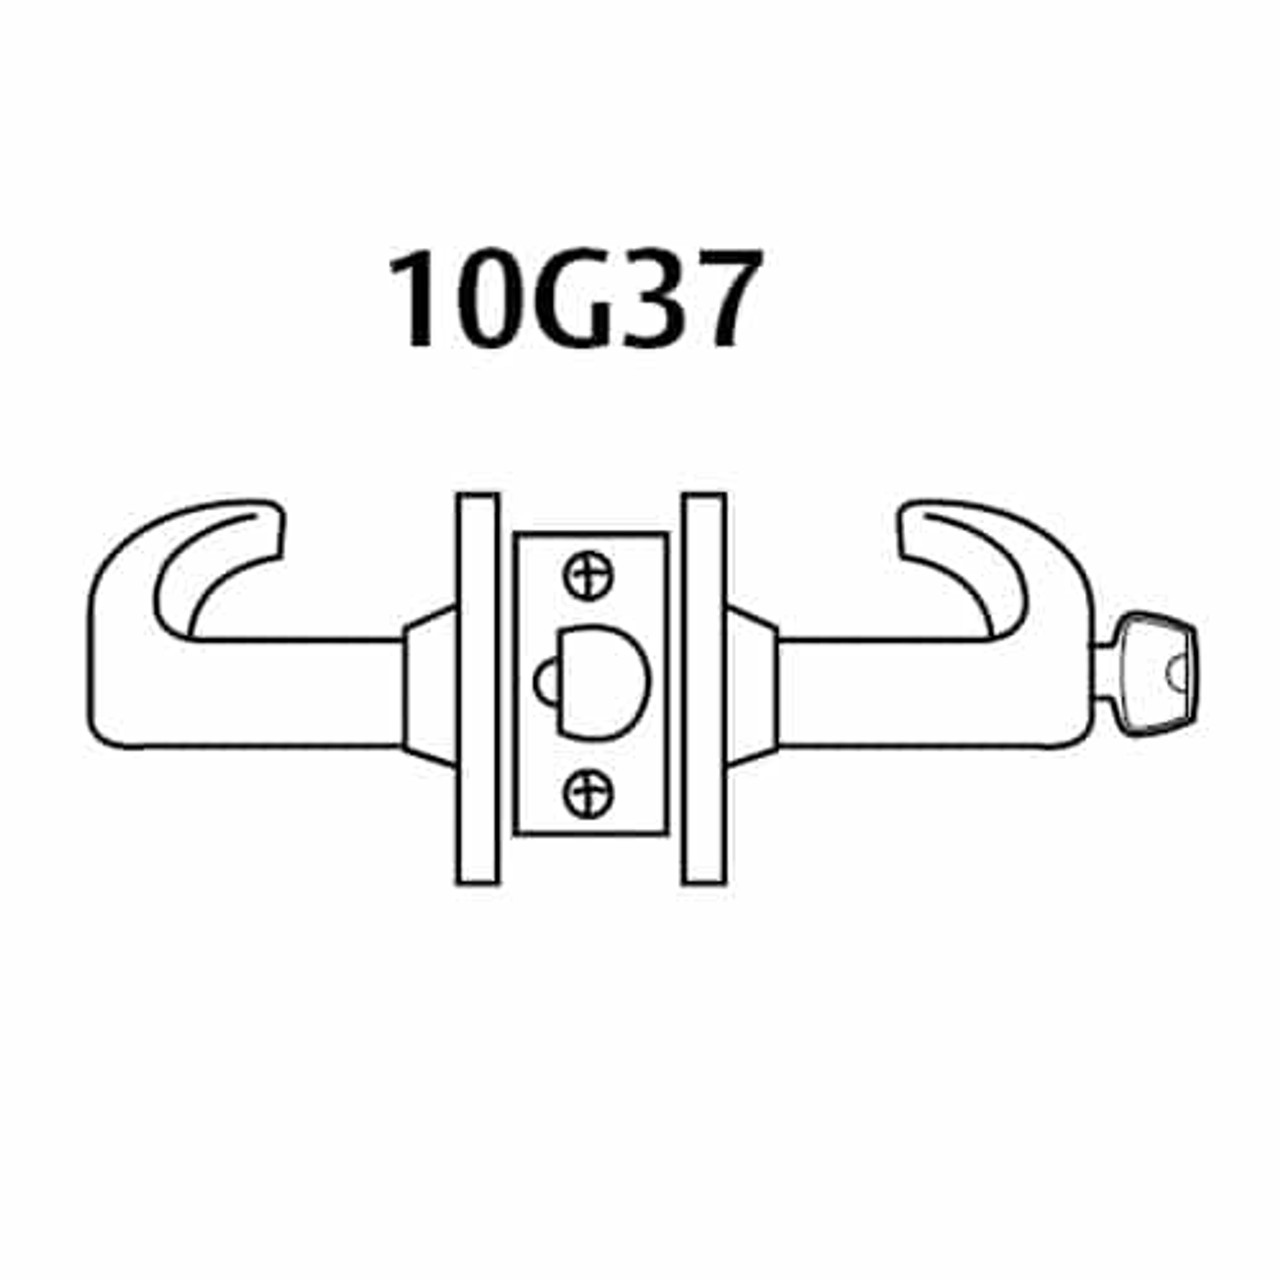 2870-10G37-GL-04 Sargent 10 Line Cylindrical Classroom Locks with L Lever Design and G Rose Prepped for SFIC in Satin Brass